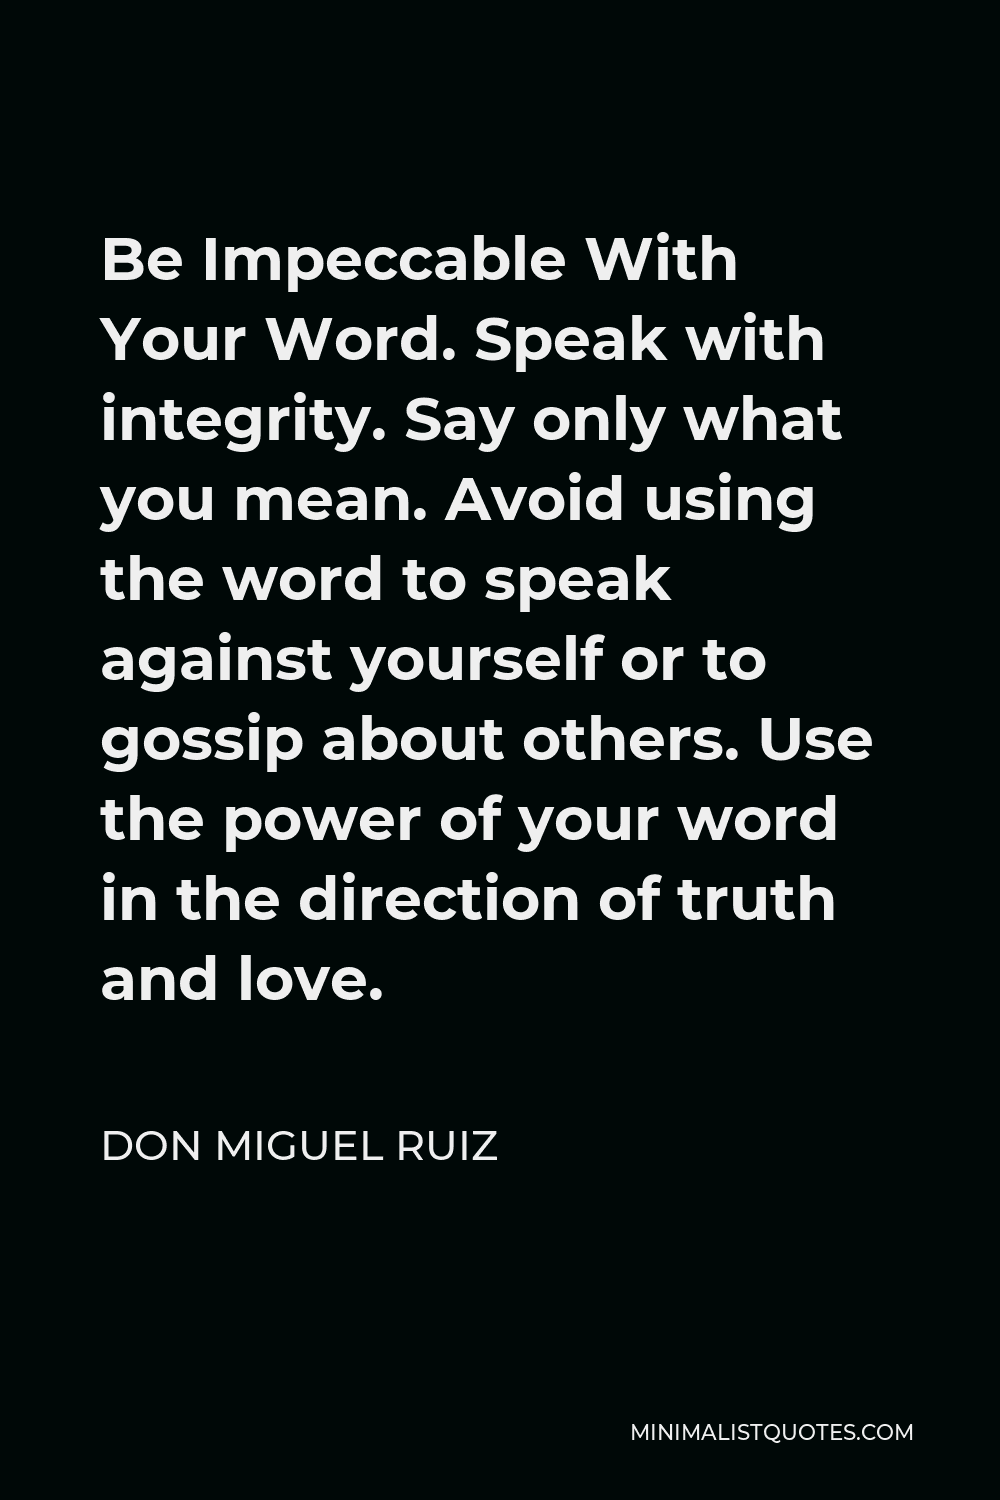 Don Miguel Ruiz Quote - Be Impeccable With Your Word. Speak with integrity. Say only what you mean. Avoid using the word to speak against yourself or to gossip about others. Use the power of your word in the direction of truth and love.